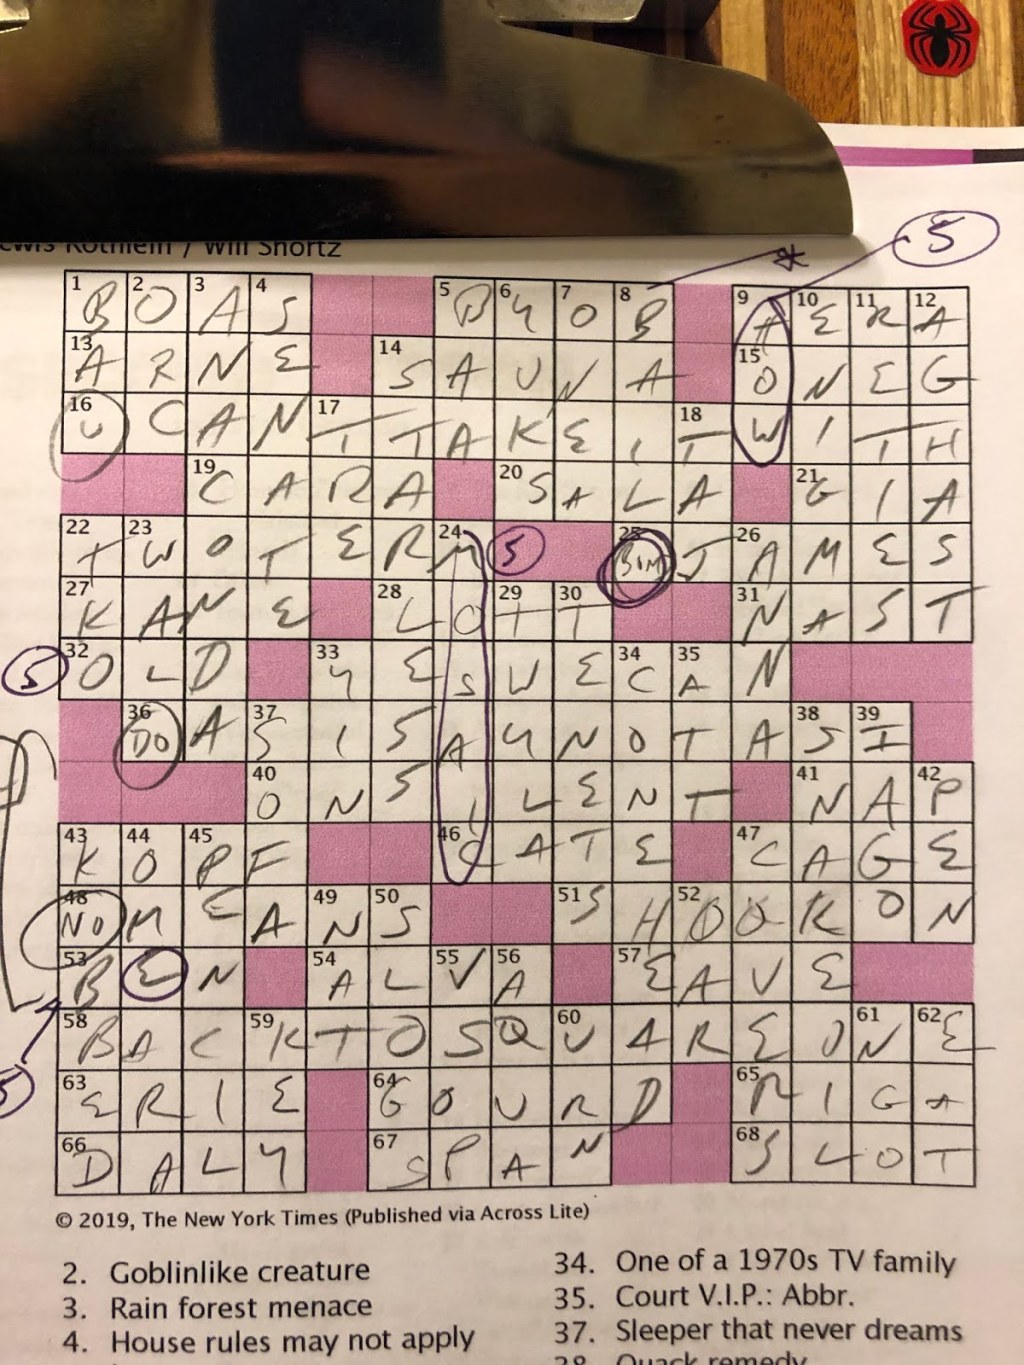 rex parker does the nyt crossword puzzle french politico marine 0